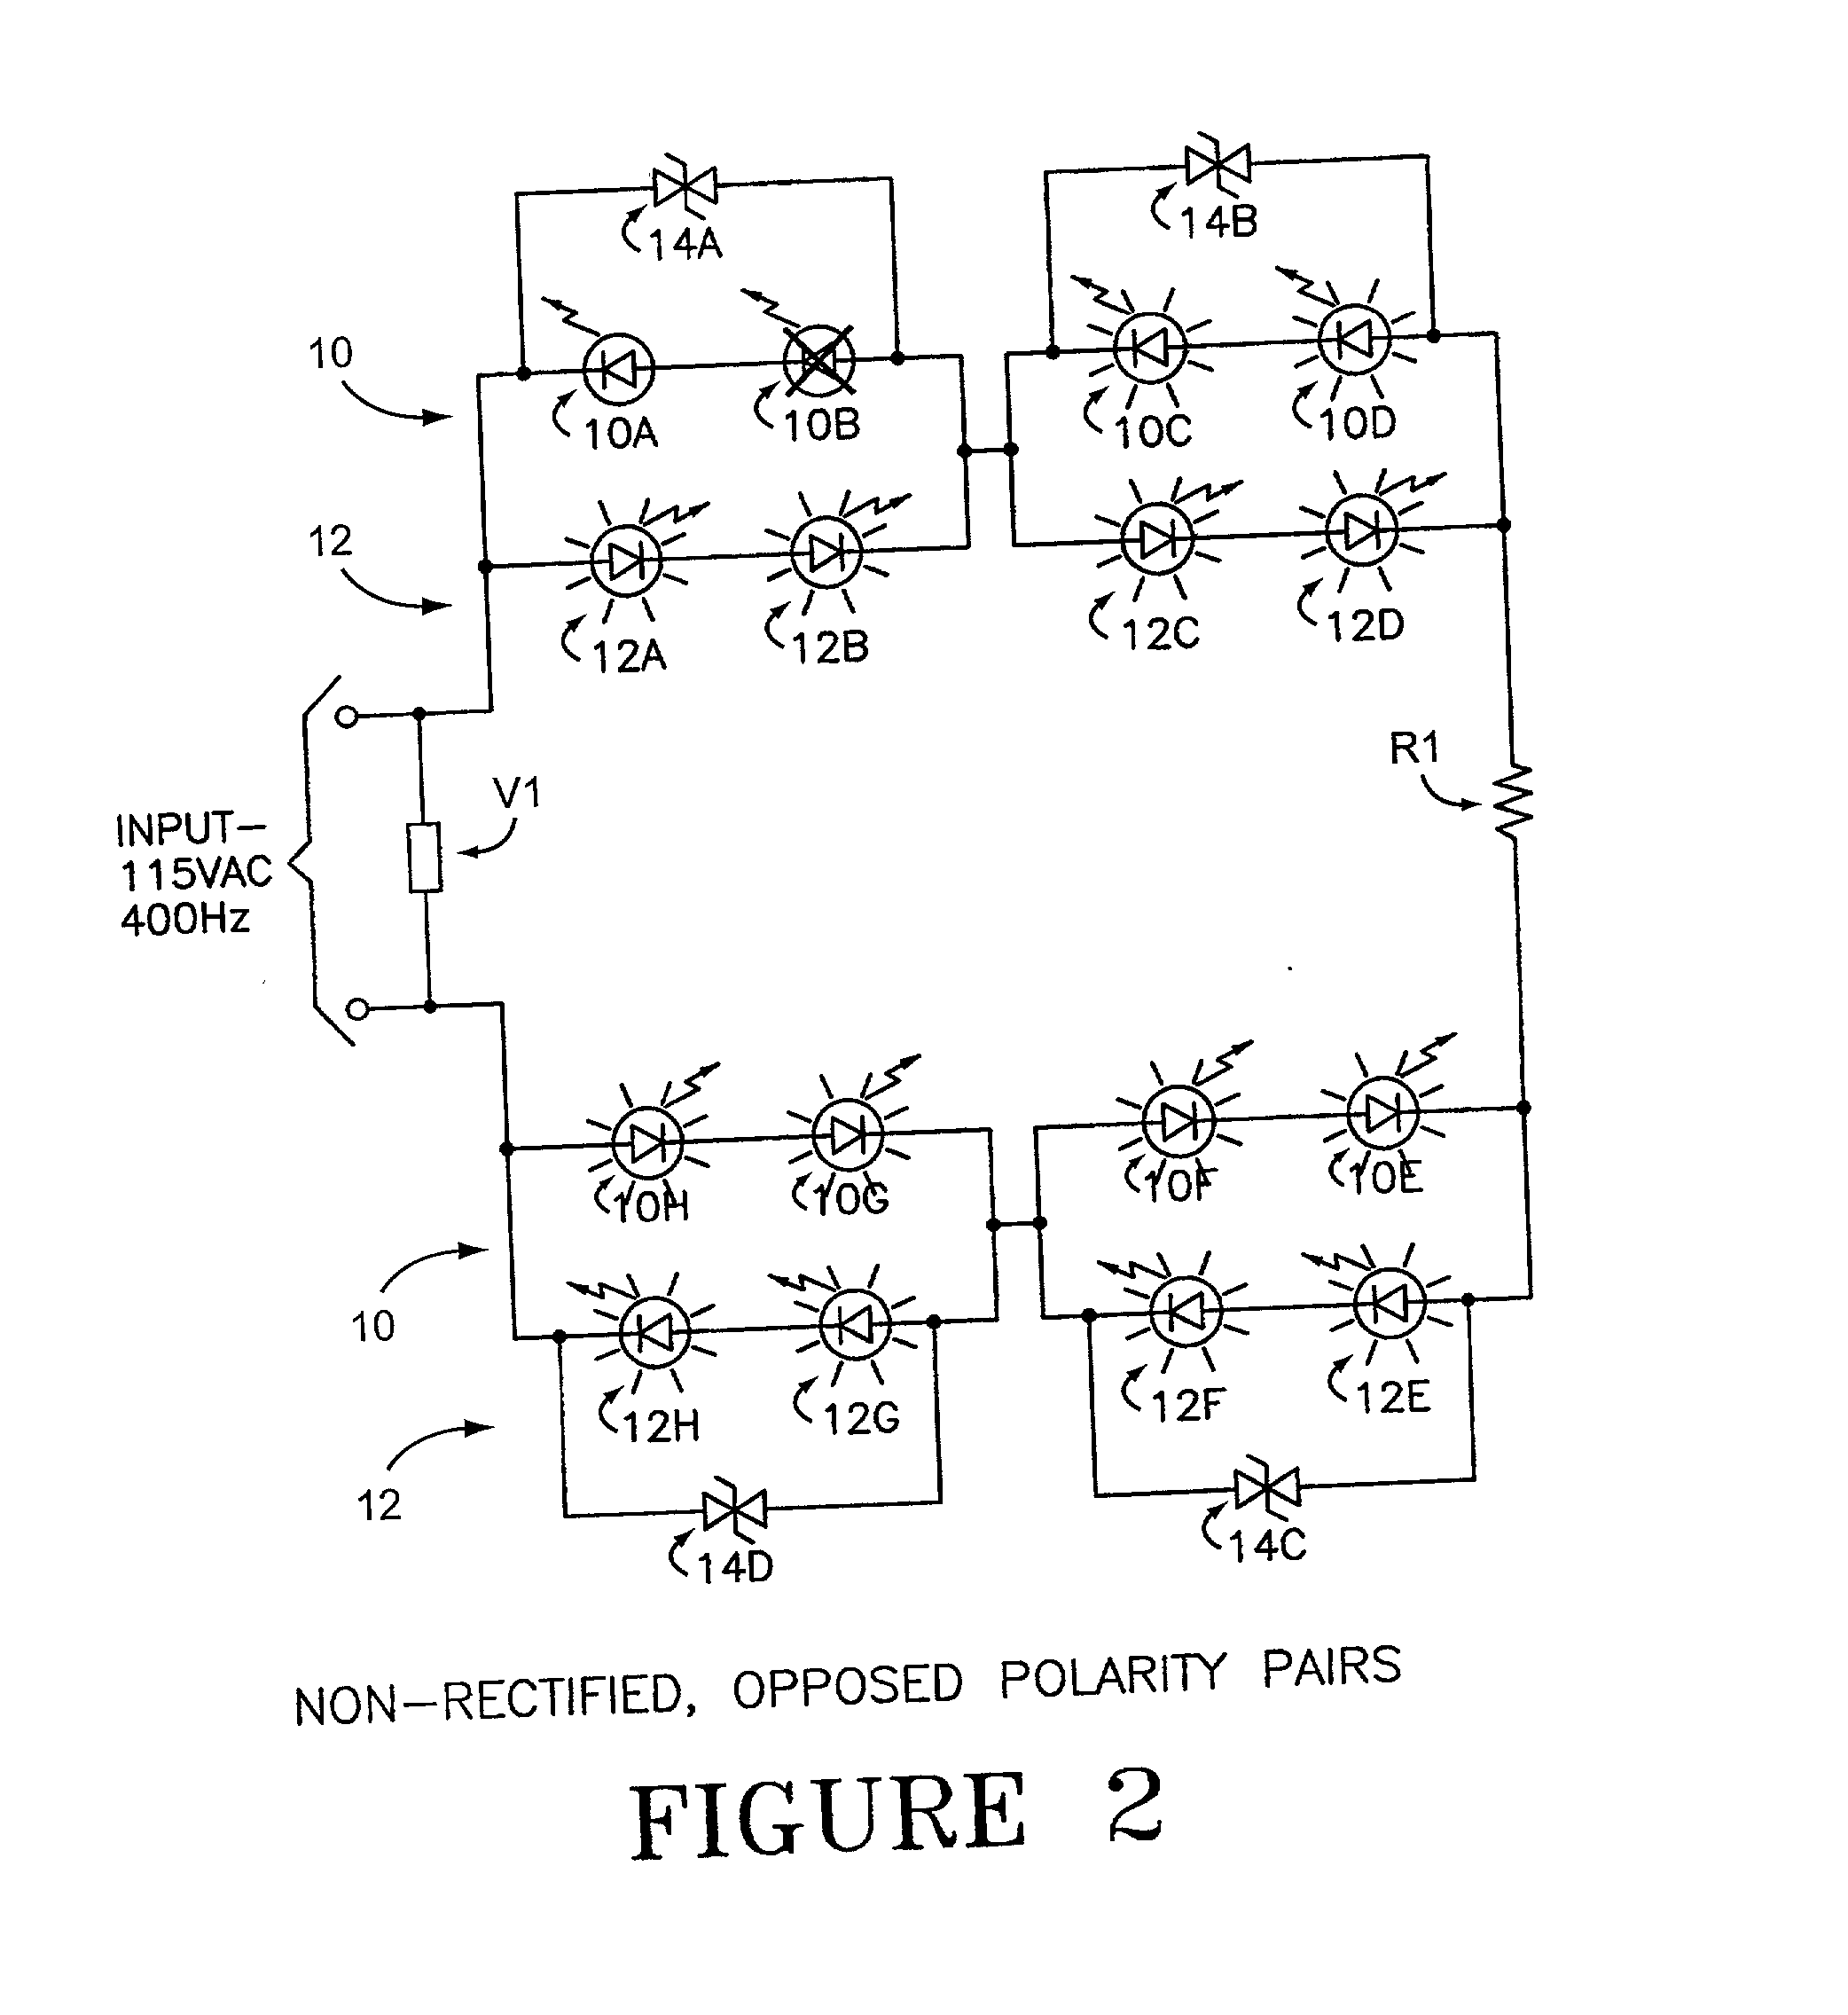 LED array primary display light sources employing dynamically switchable bypass circuitry